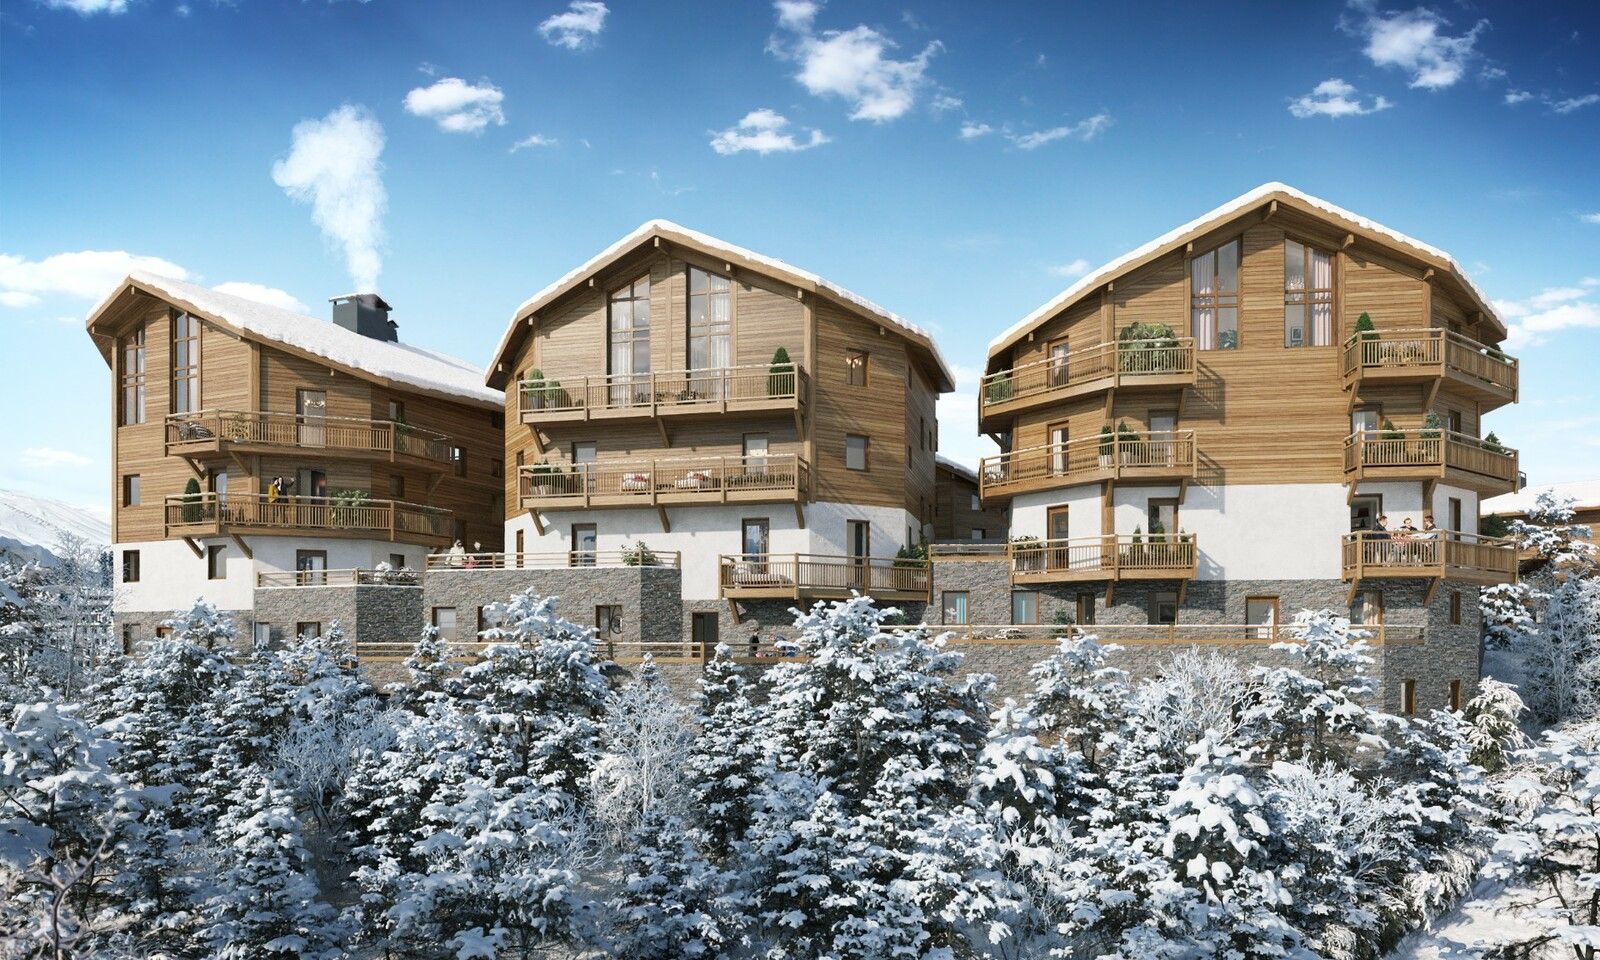 4 bed Penthouse For Sale in Alpe d'Huez Grand Domaine, French Alps